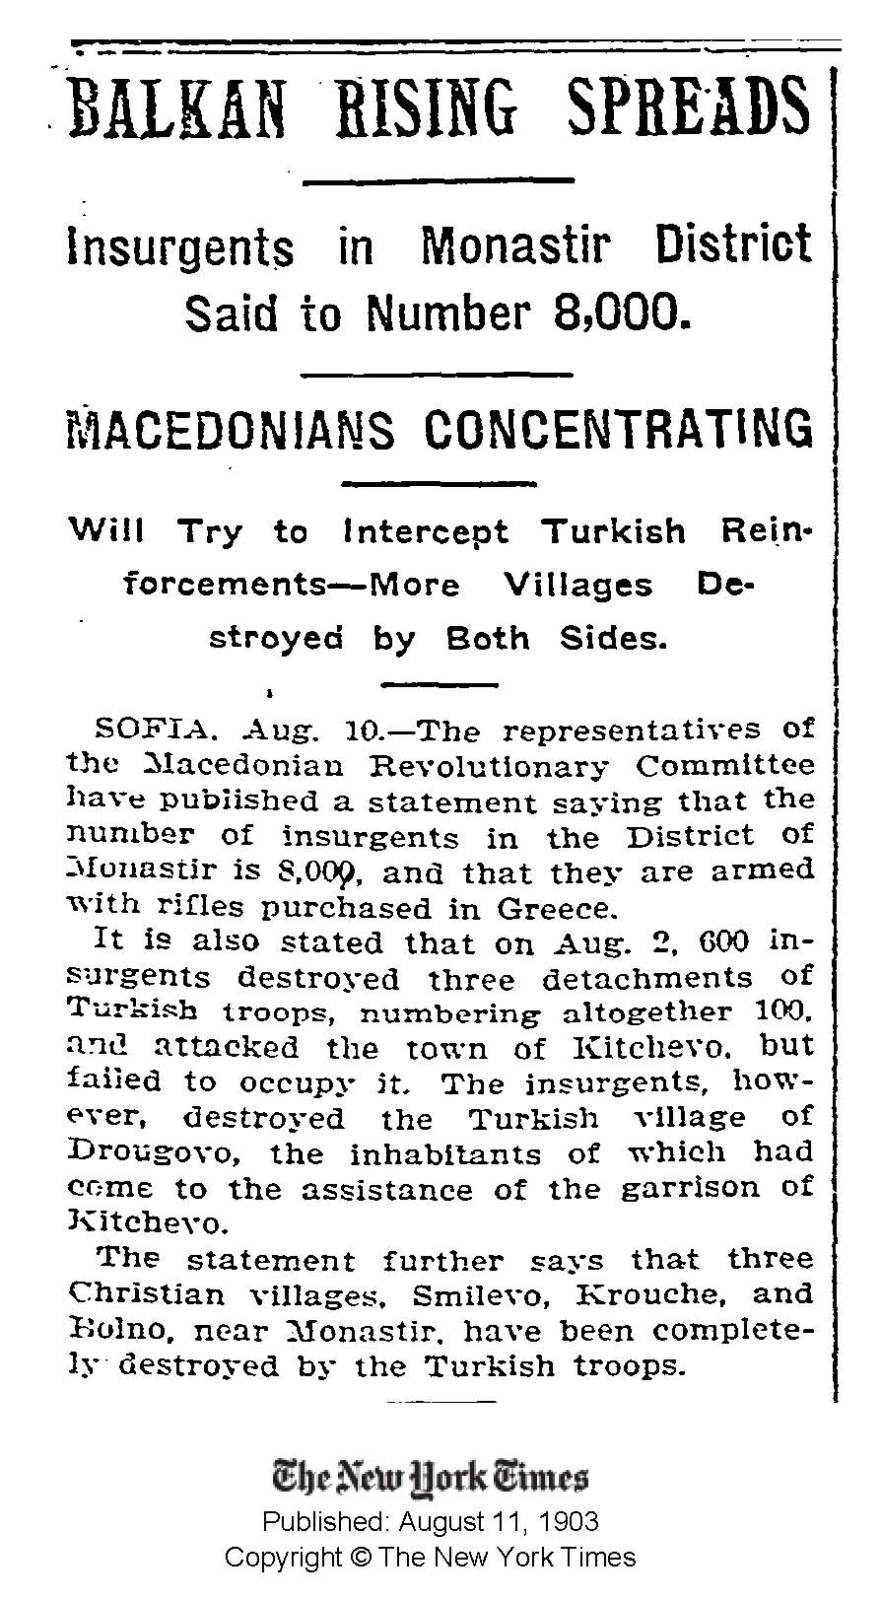 1903.08.11_The New York Times - Balkan rising spreads